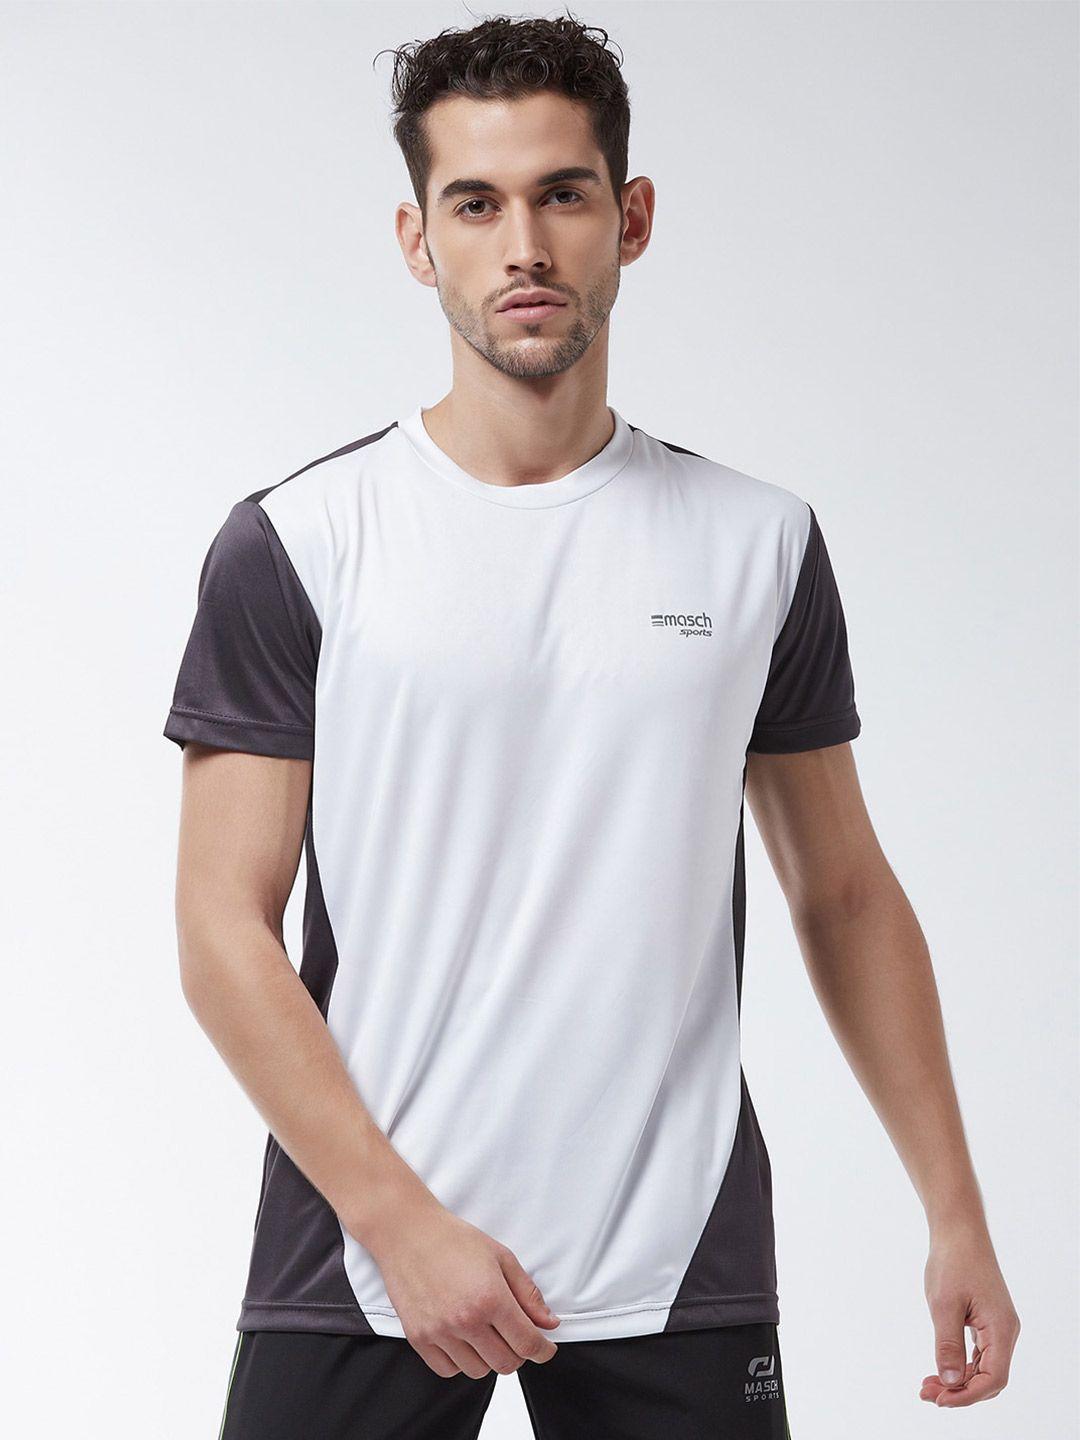 masch sports men white & charcoal colourblocked dry fit training or gym t-shirt